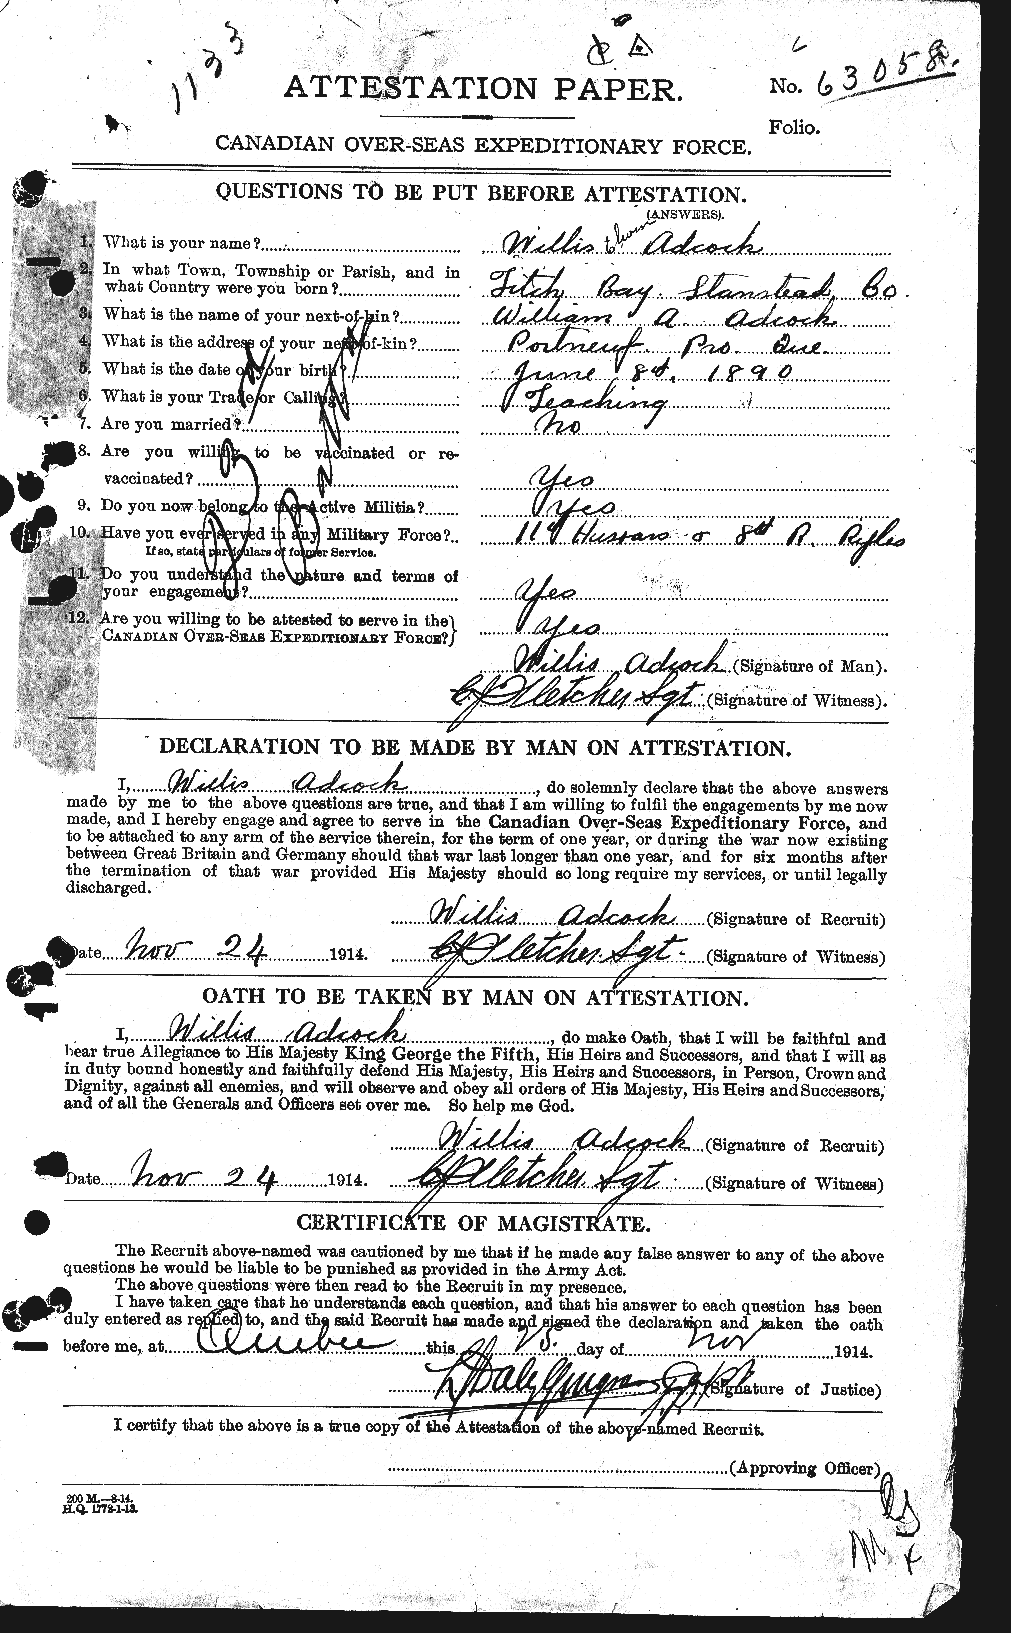 Personnel Records of the First World War - CEF 202438a